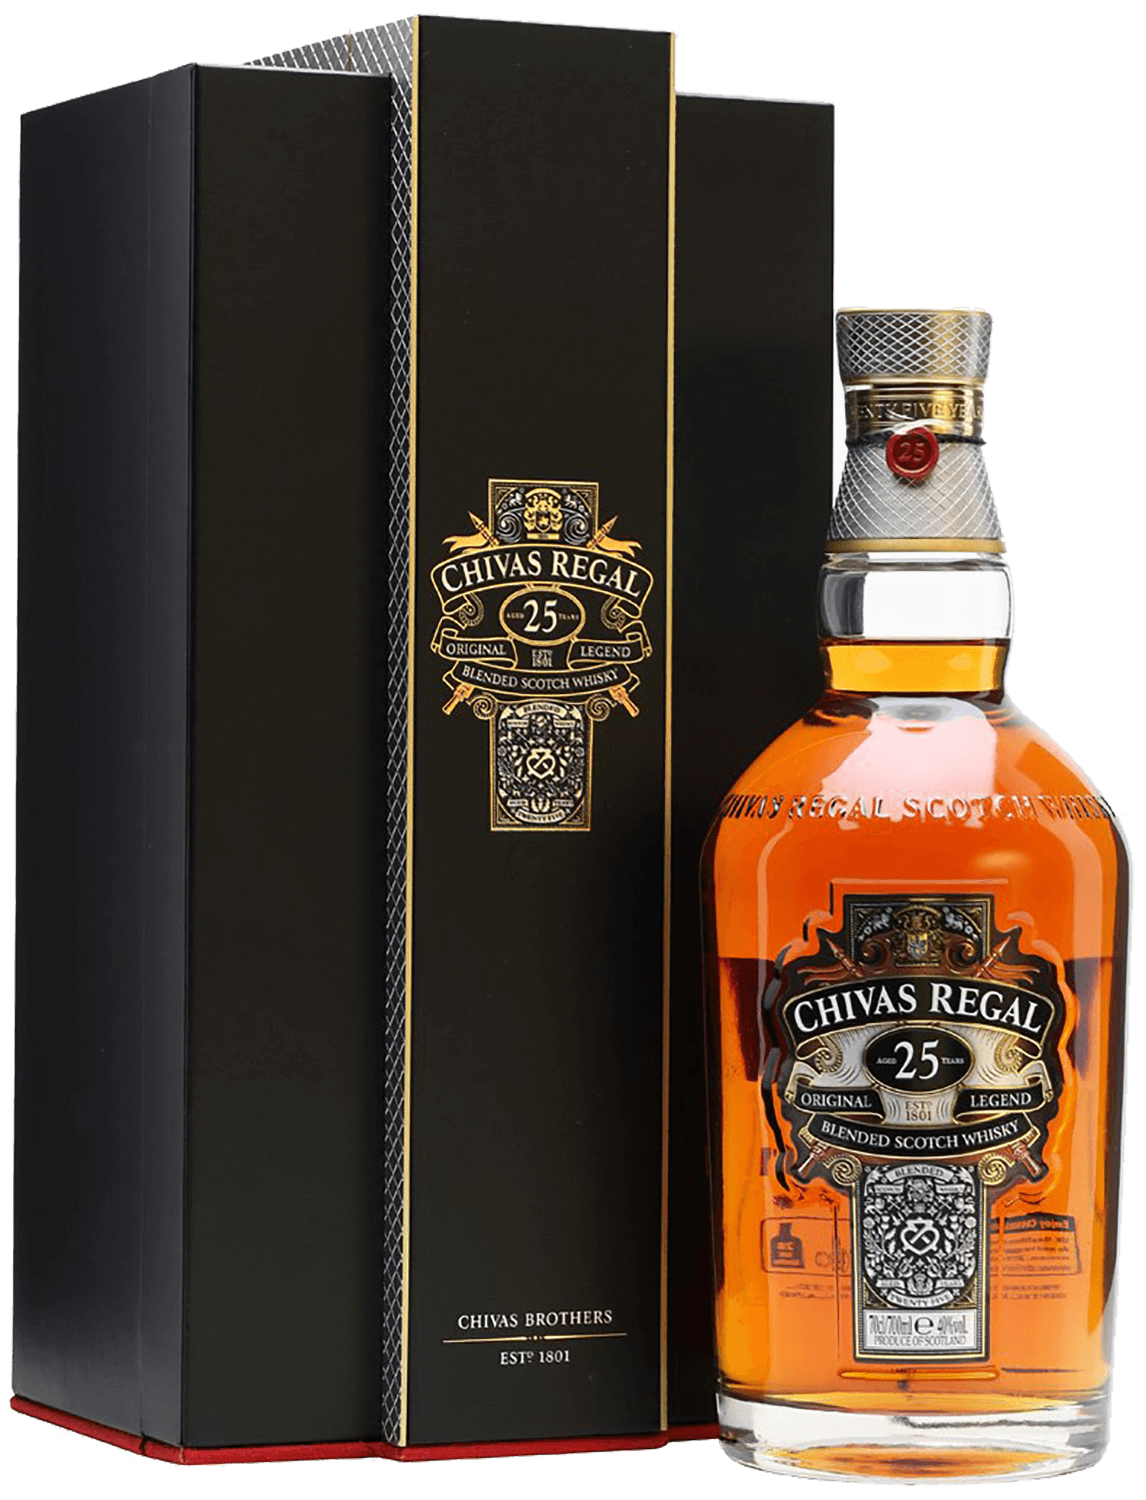 Chivas Regal 25 y.o. blended scotch whisky (gift box) chivas regal extra blended scotch whisky gift box